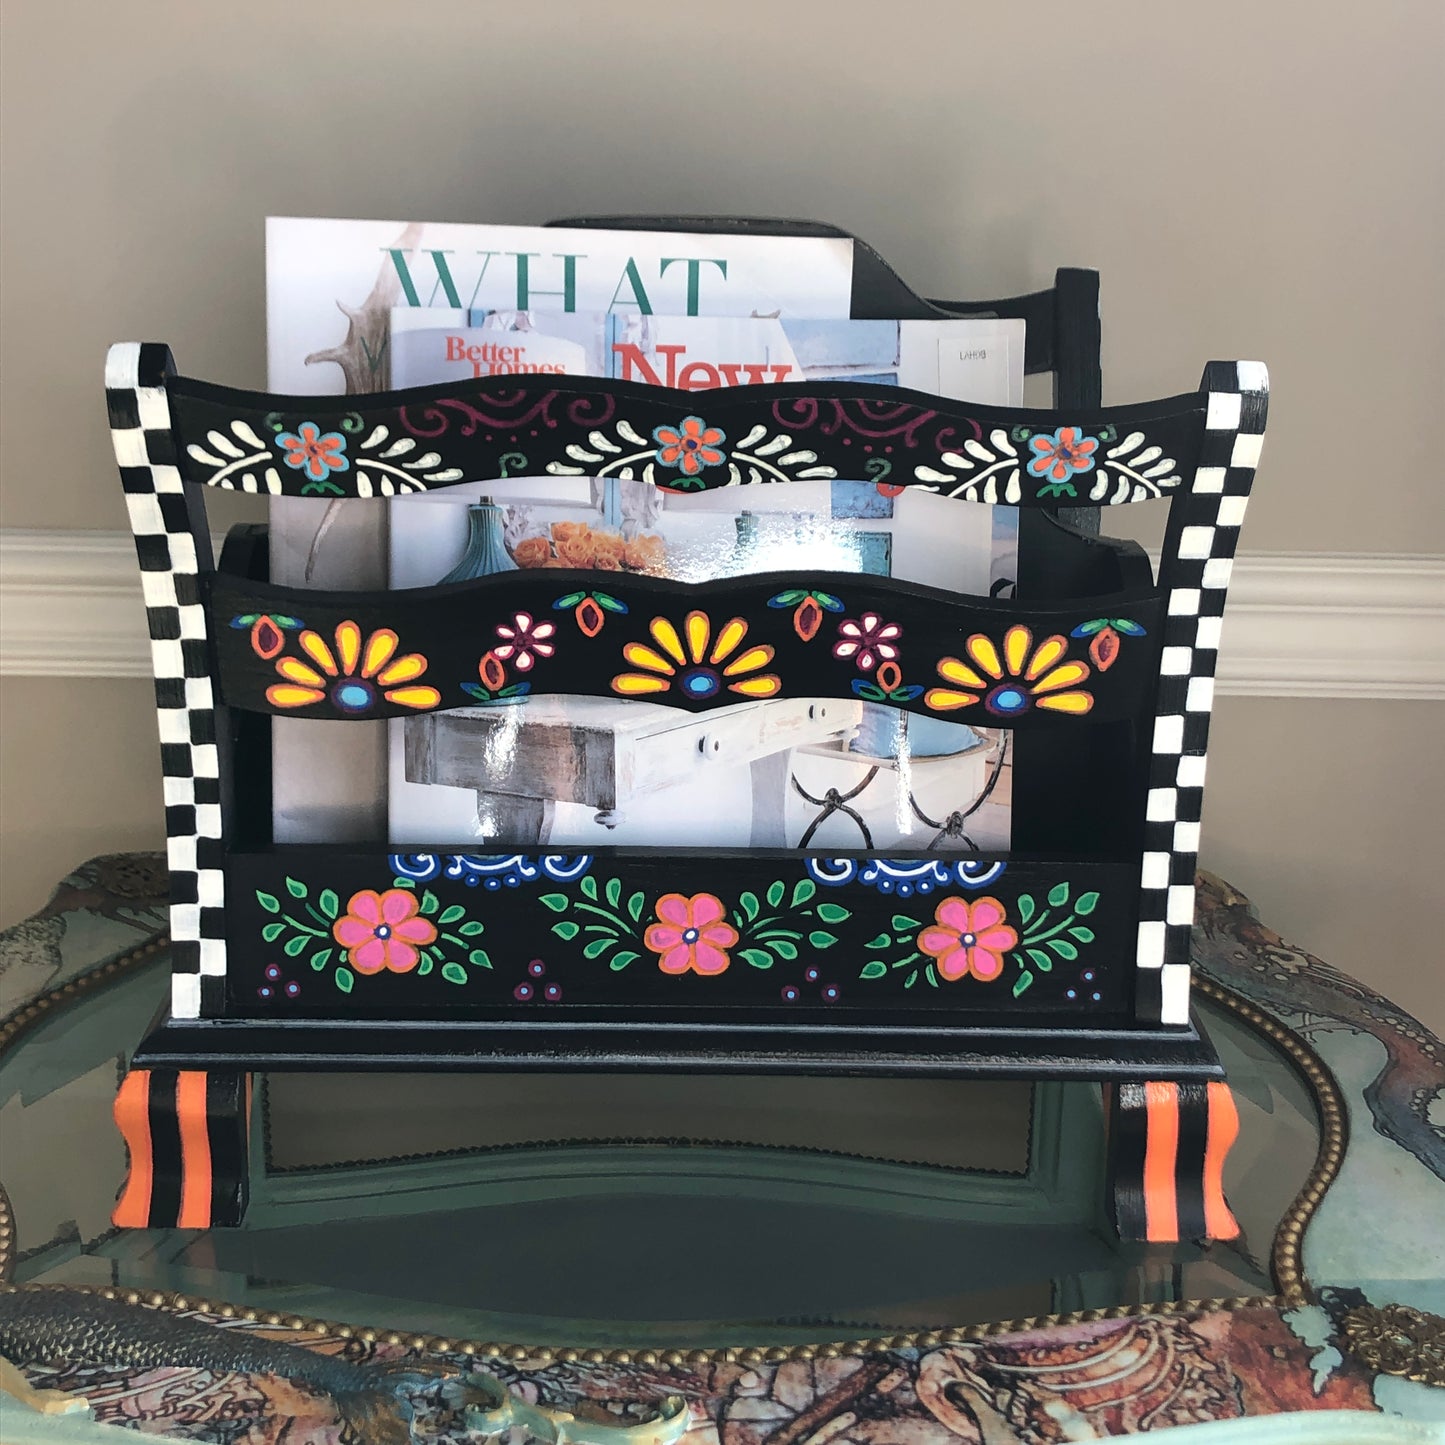 Magazine Rack, Bohemian, Colorful, Mexican Art, Black and White Check, Hand Painted